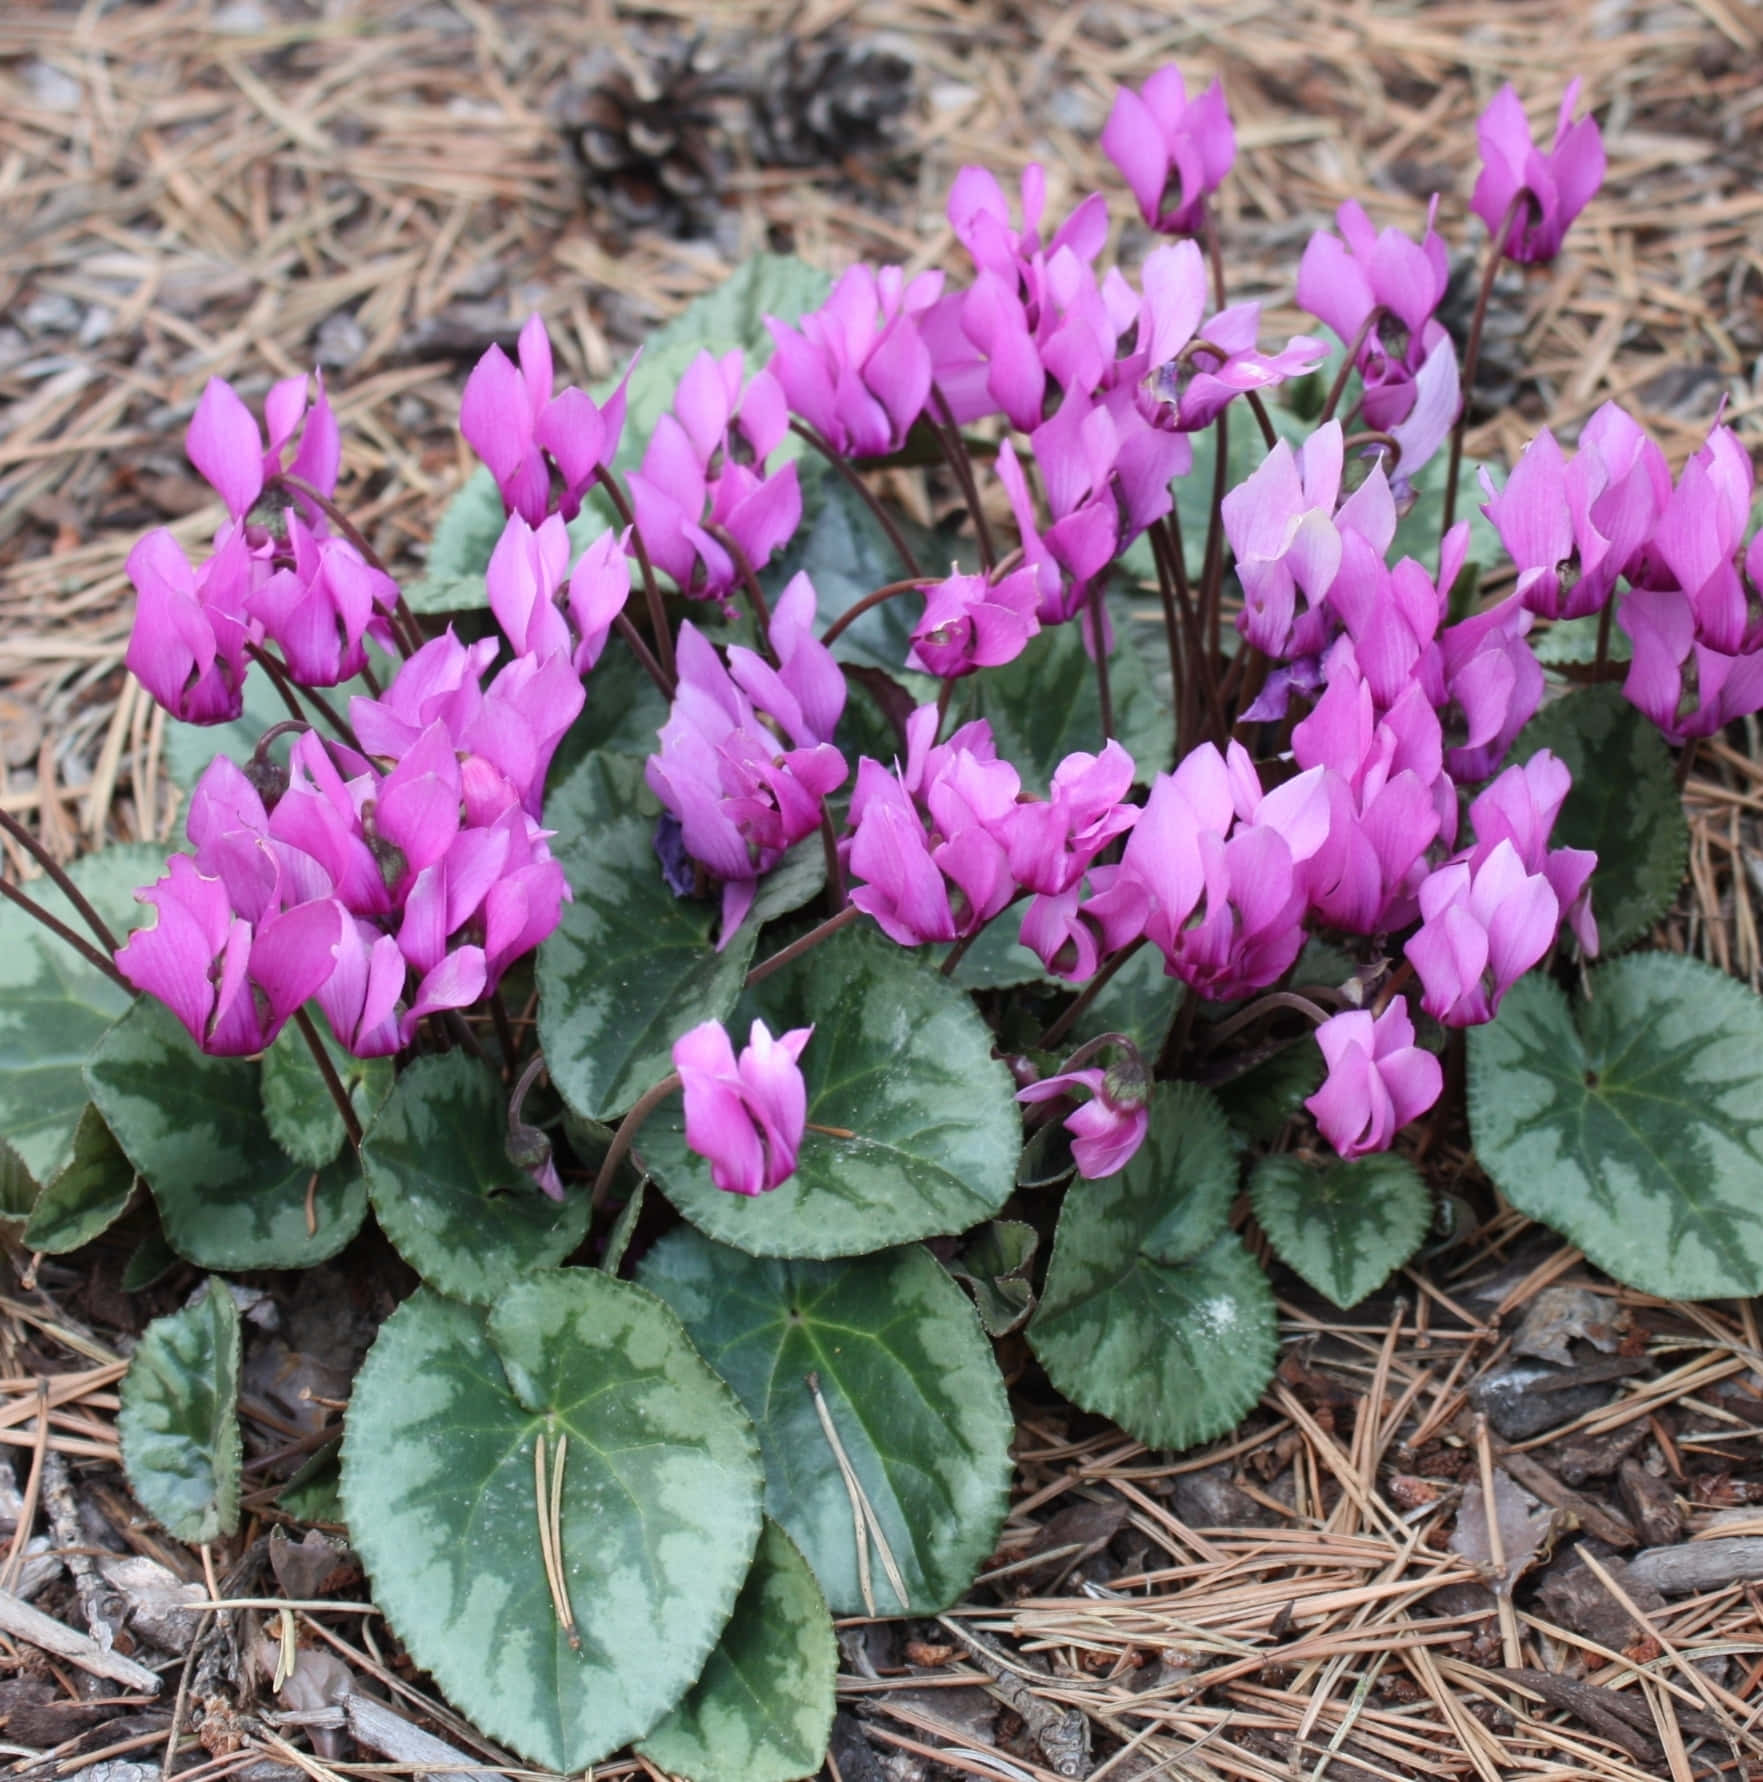 a group of purple flowers growing in the ground